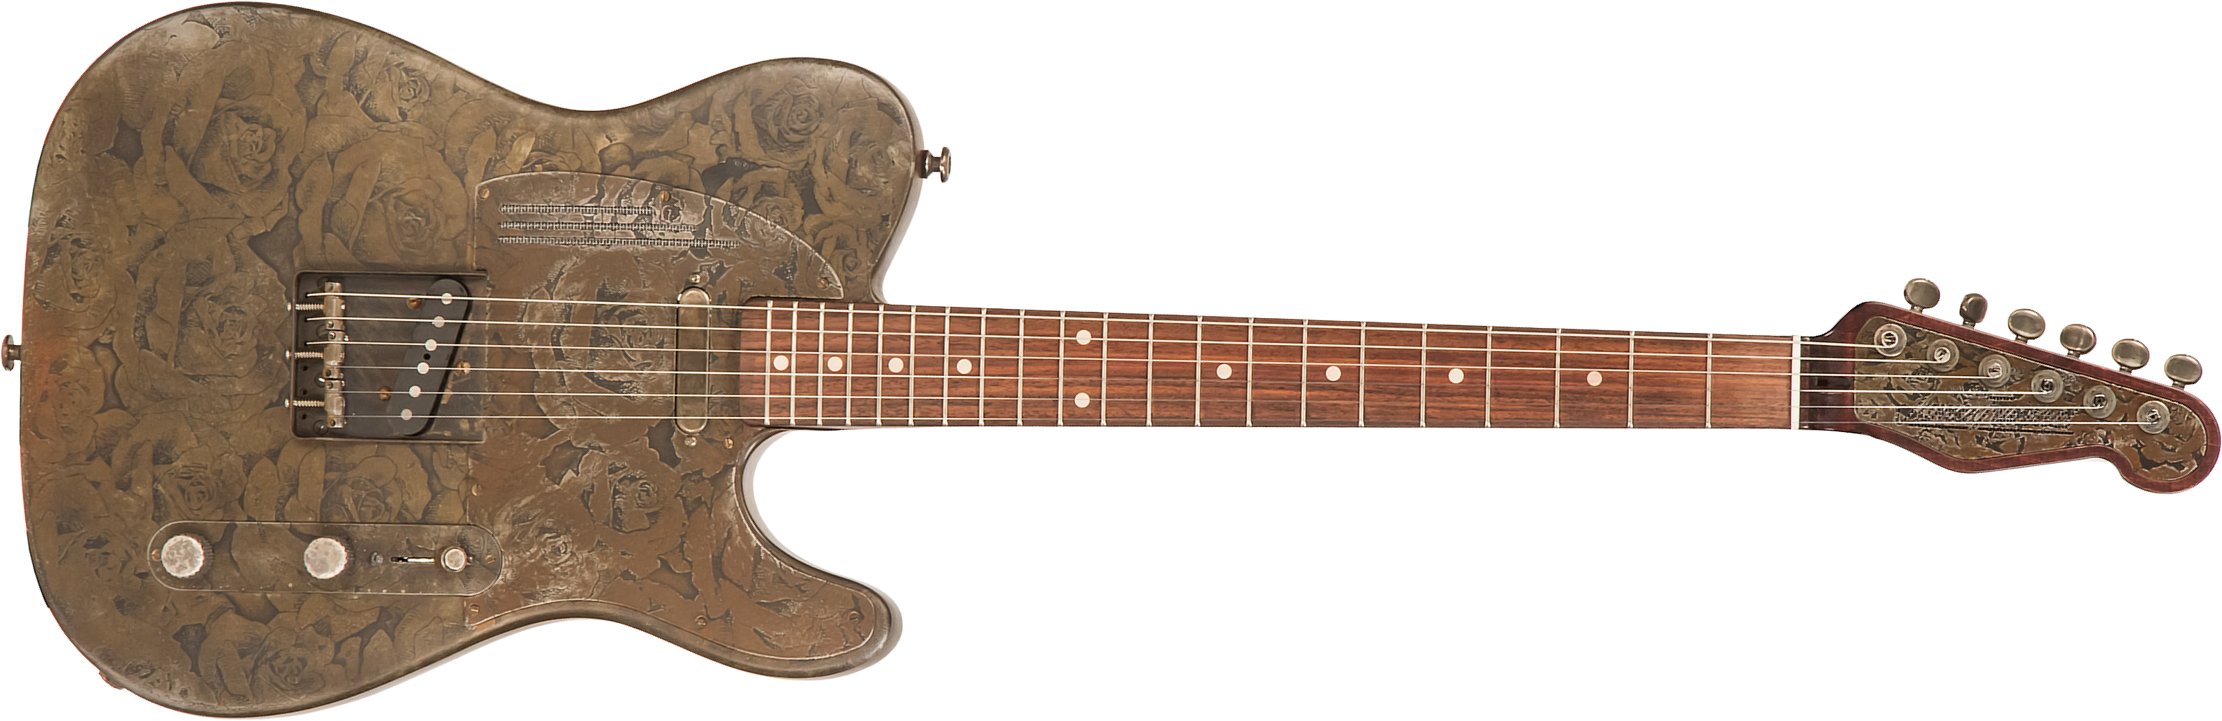 James Trussart Steelcaster Perf.back 2s Ht Rw #21000 - Rusty Roses - Semi-hollow electric guitar - Main picture